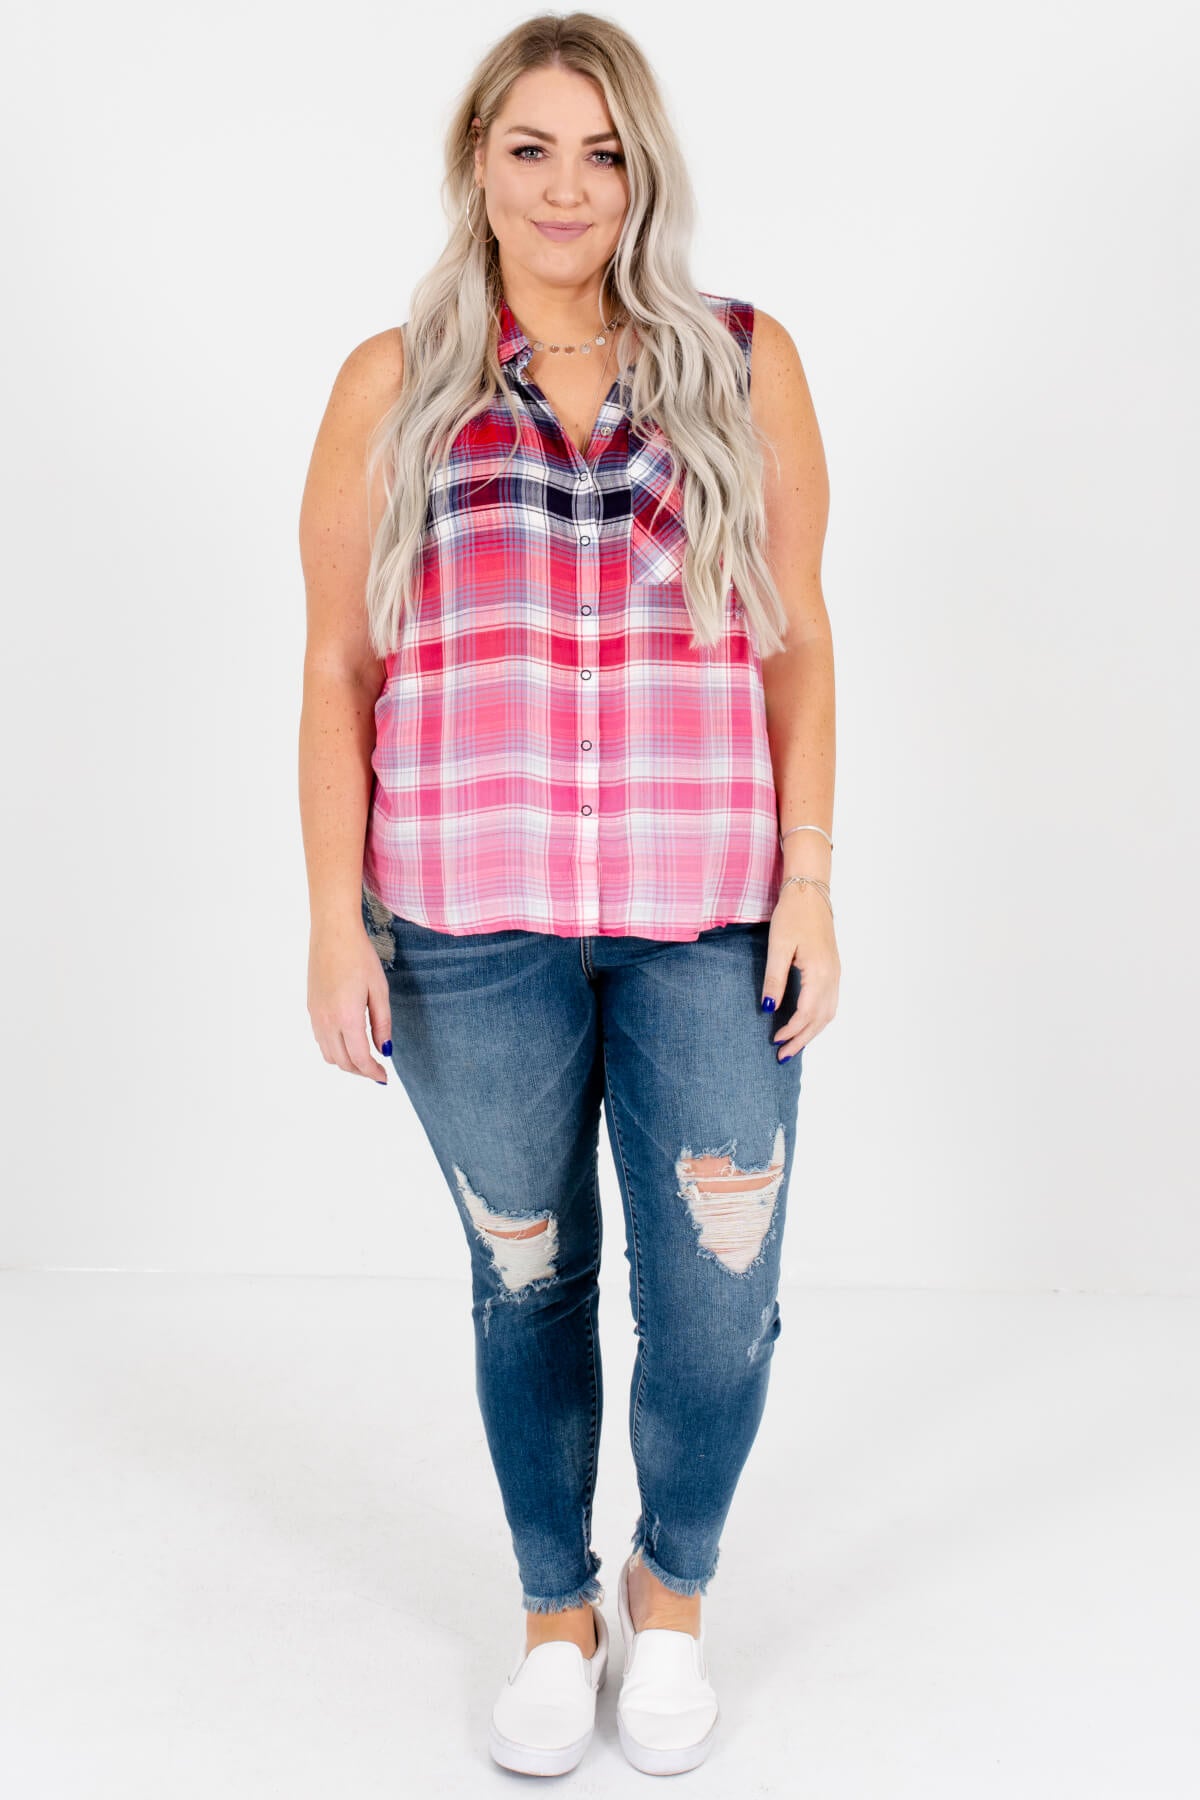 Red White and Blue Ombre Plaid Plus Size Boutique Tank Tops